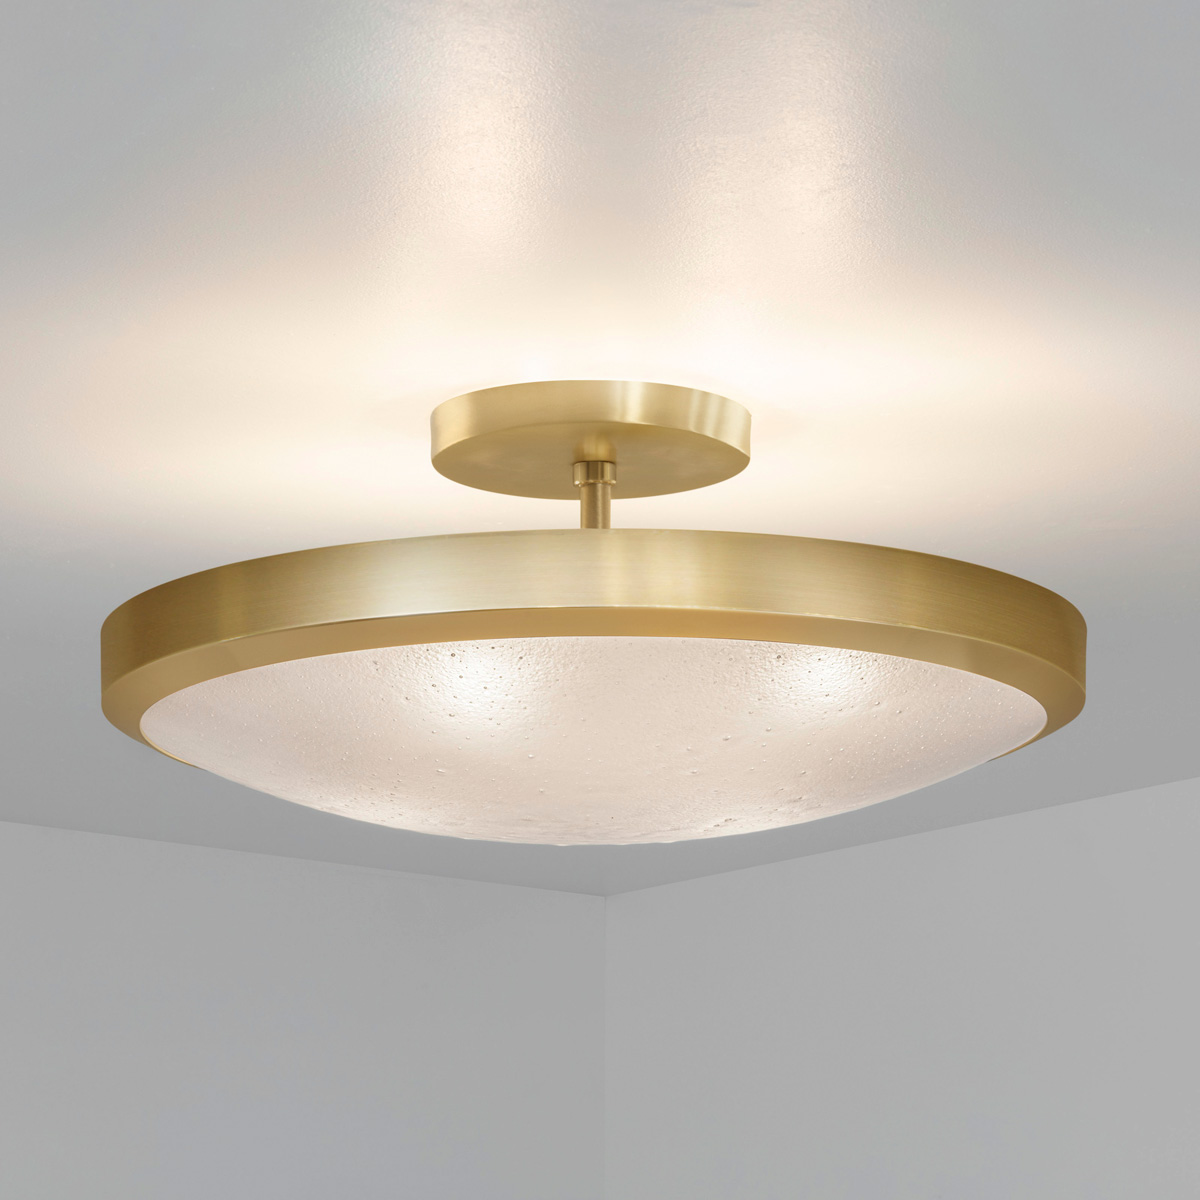 Uno ceiling light by gaspare asaro